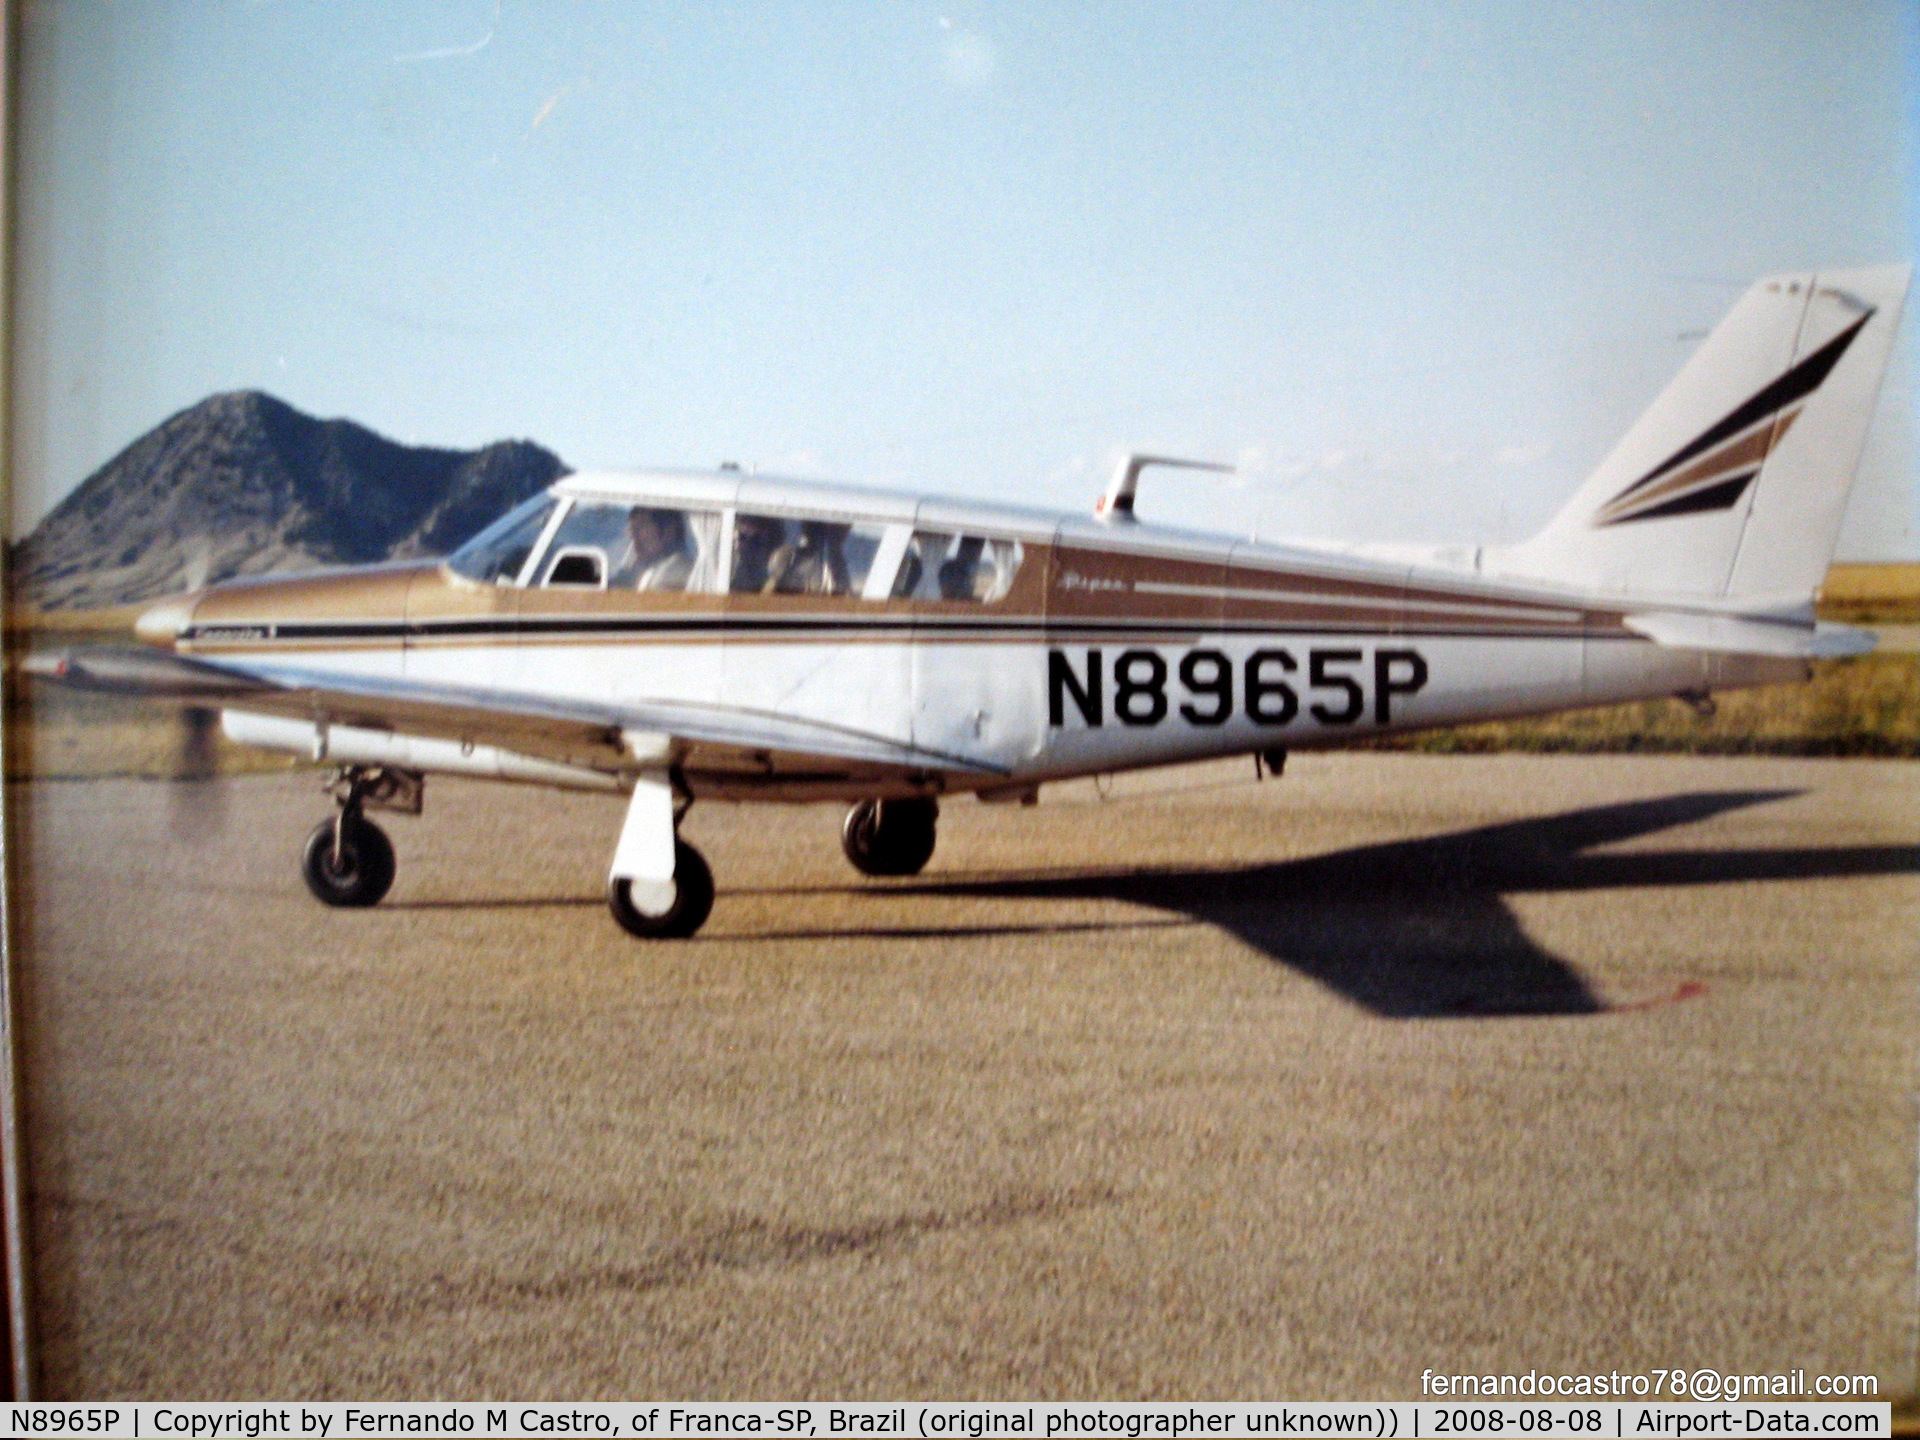 N8965P, 1966 Piper PA-24-260 C/N 24-4422, Aircraft belonged to Mr Willis Laraway of New Ulm, MN in the 80's. I was a foreign exchange student form Brazil living with the Laraways in 77-78. Photo taken 8-8-2008 from an existing picture from Mr. Laraway, at his Longlake, MN cabin.